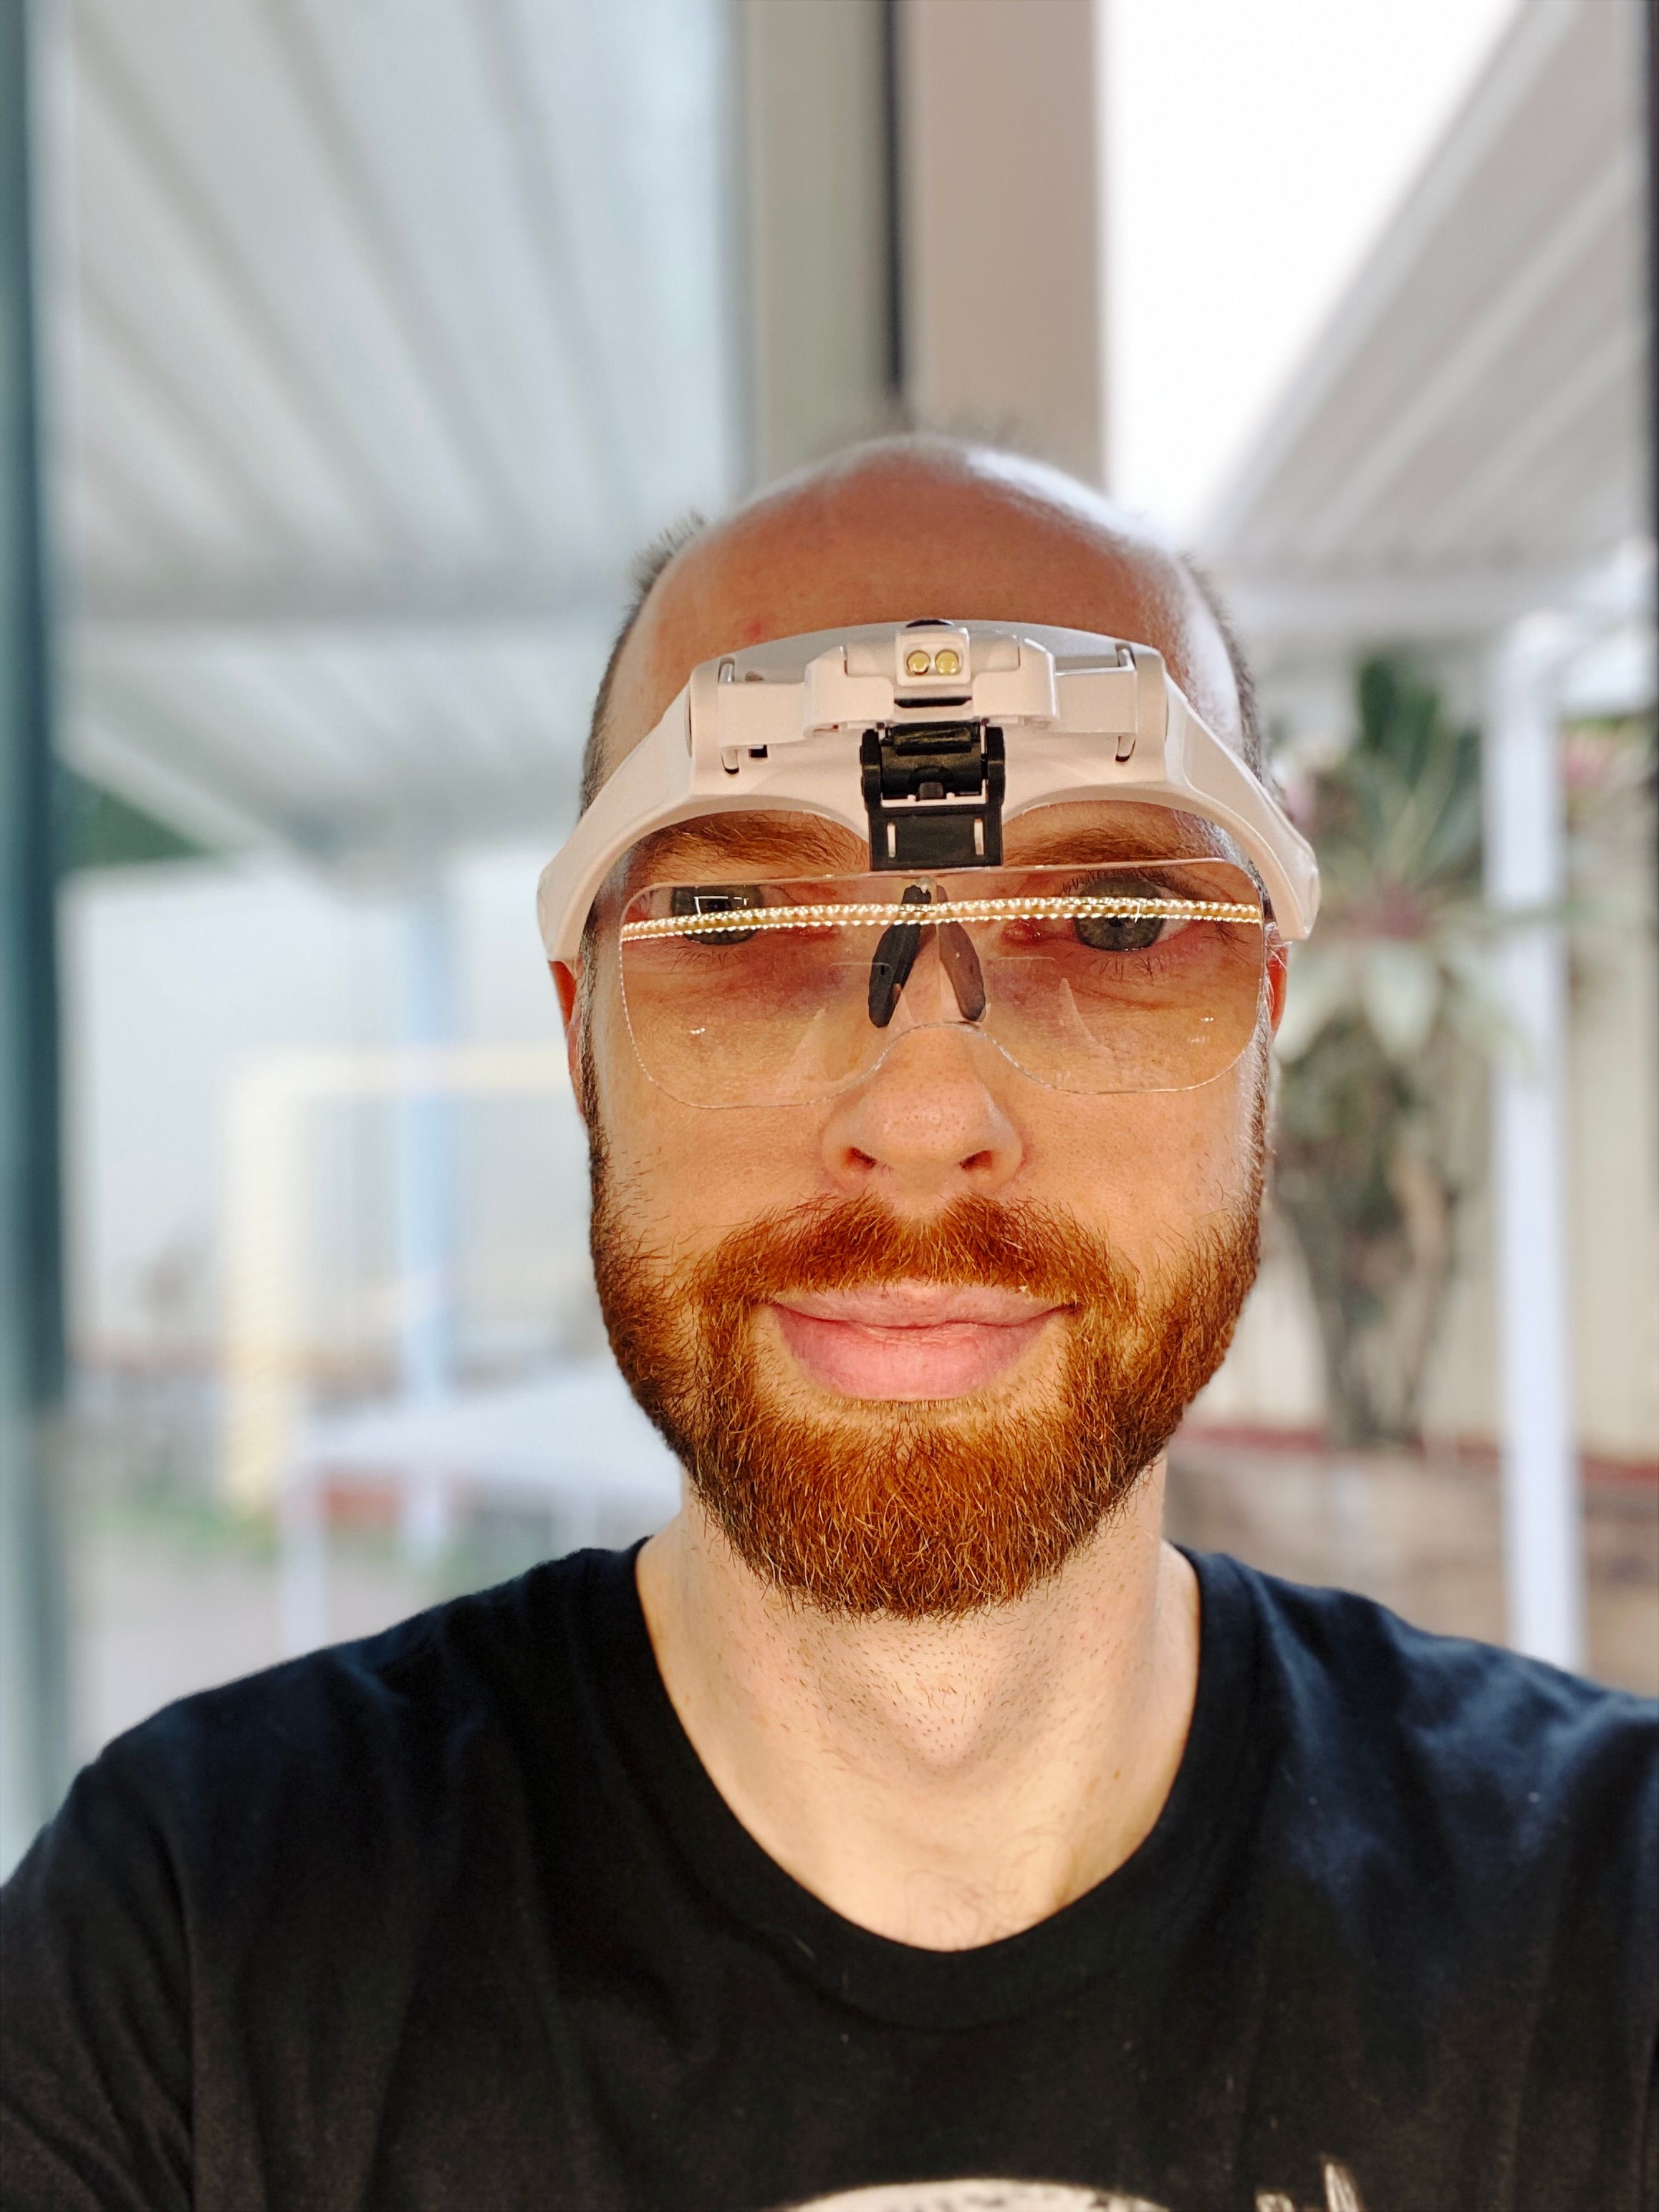 A selfie of me, a white man with a short red beard and receeding hairline, wearing head-mounted set of magnifying eyeglasses. The headset itself is white and the lenses are a single piece of almost sunglasses-shaped hard plastic that attaches to the front of the headset and can be moved forwards or backwards. My eyes look freakishly large because I'm looking directly through the lenses at the camera.